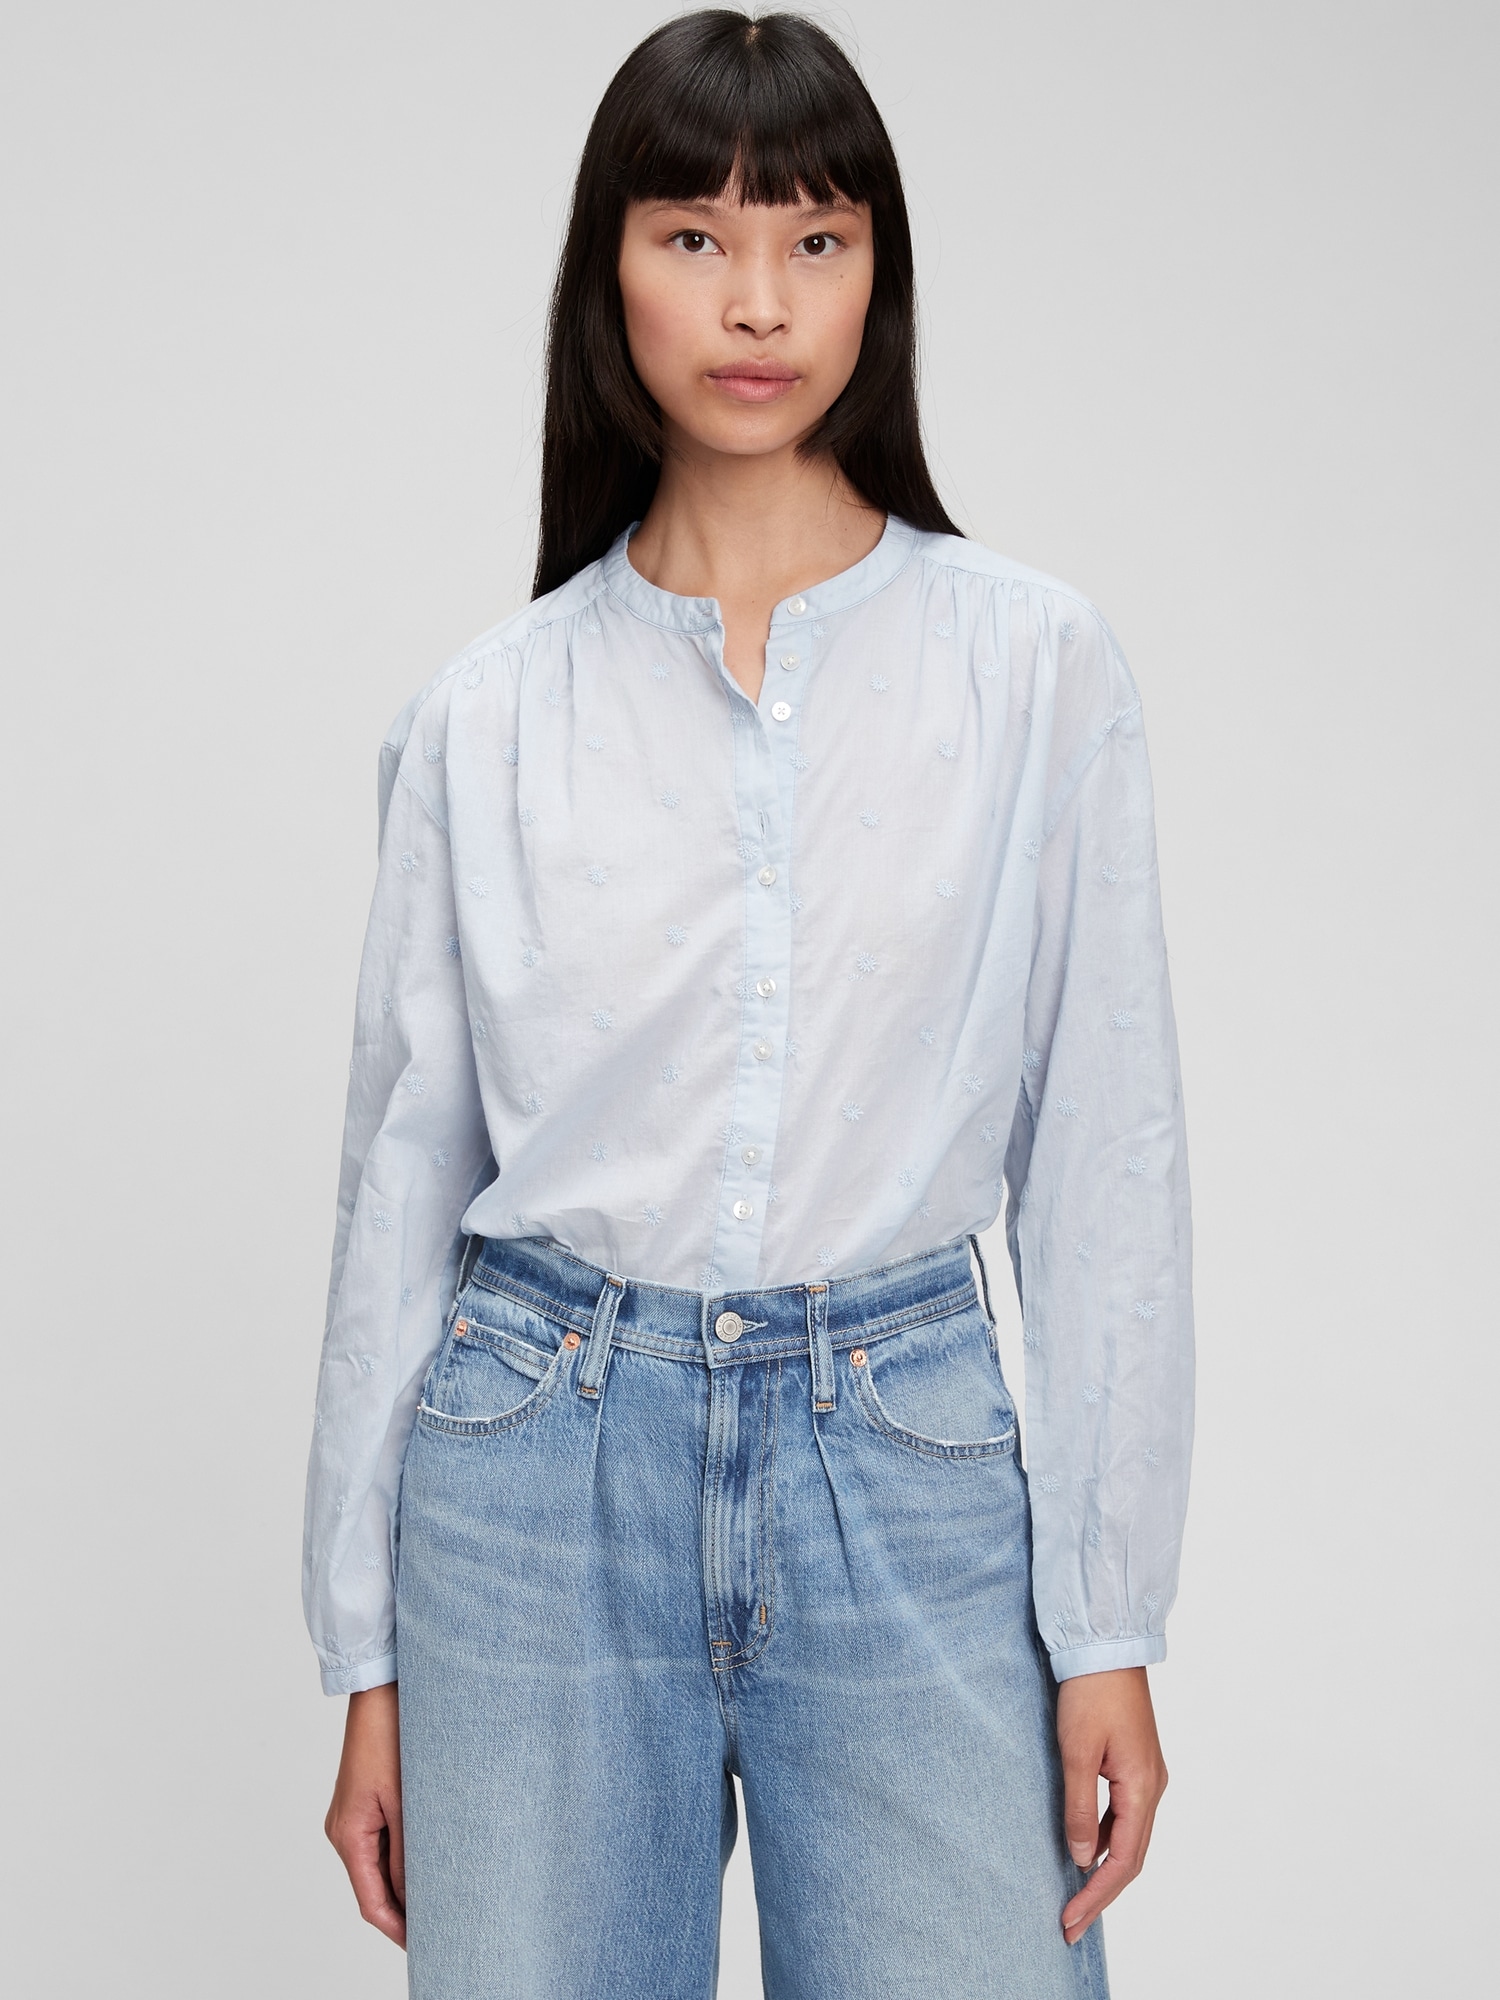 Easy Button-Front Top | Gap